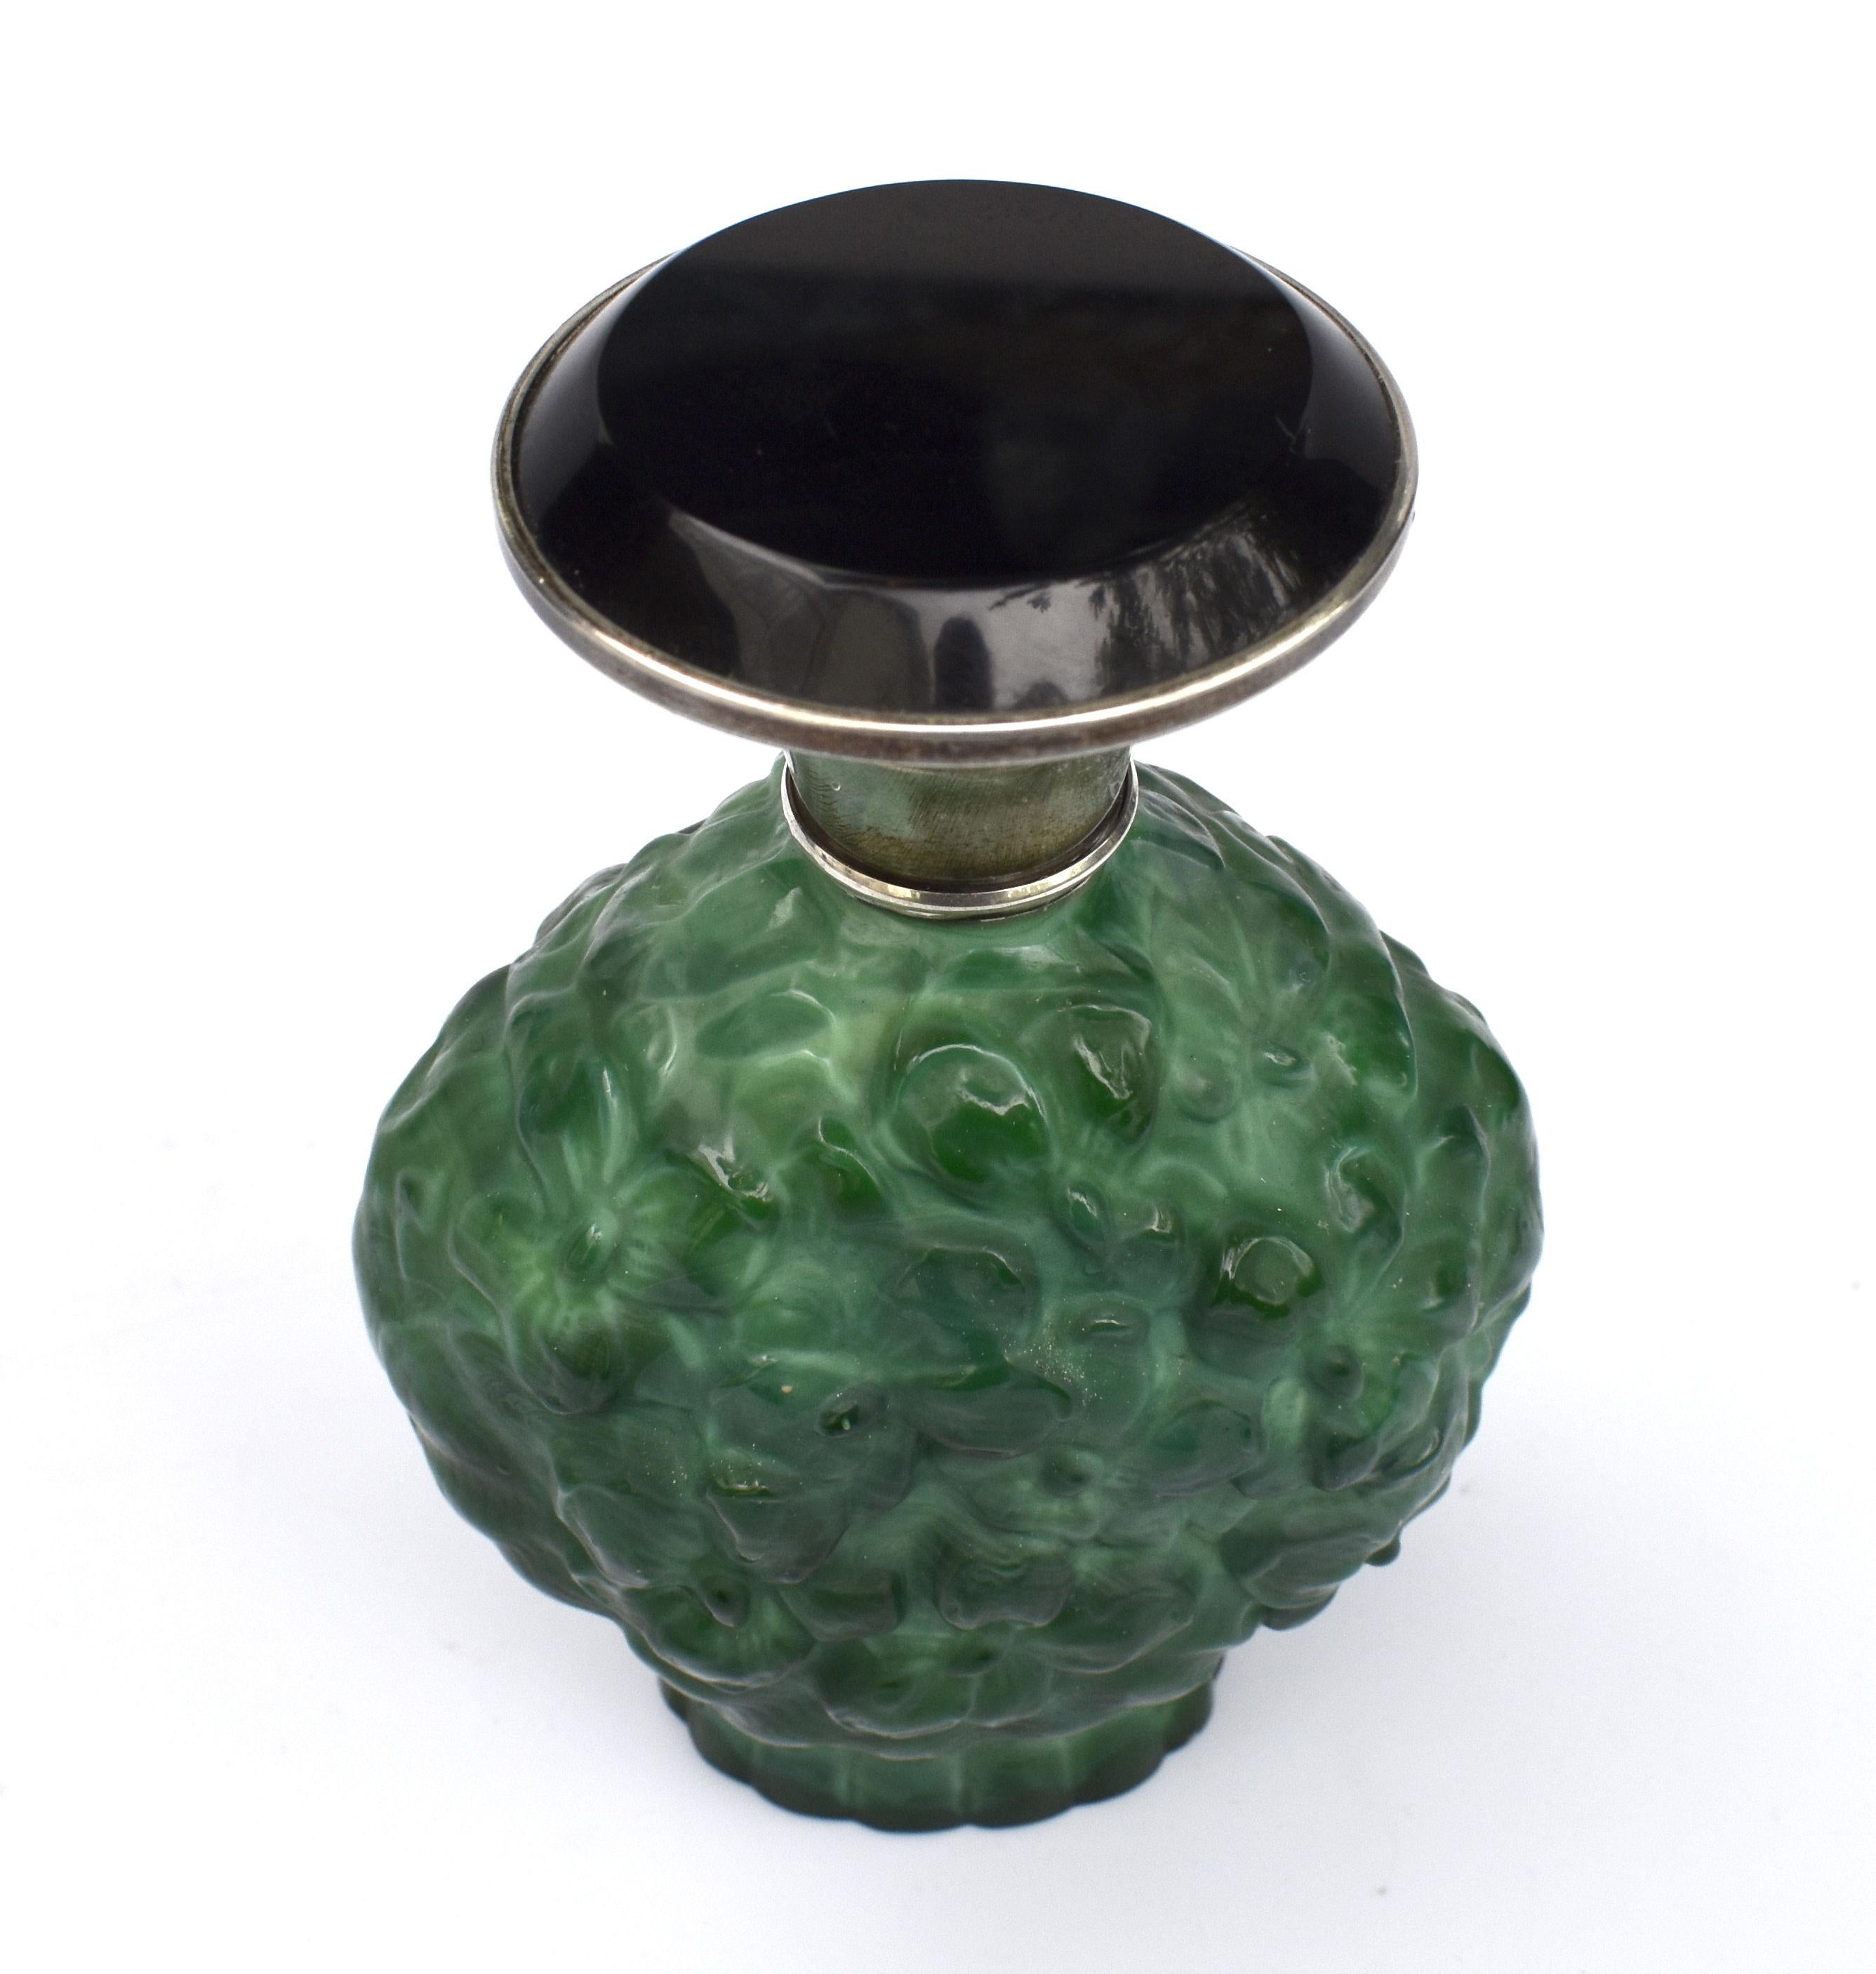 Beautiful and original 1930's large Art Deco green malachite glass perfume bottle with solid silver and black glass lid. Made in Czechoslovakia. This wonderful piece comes to you in excellent condition with no flaws to mention.